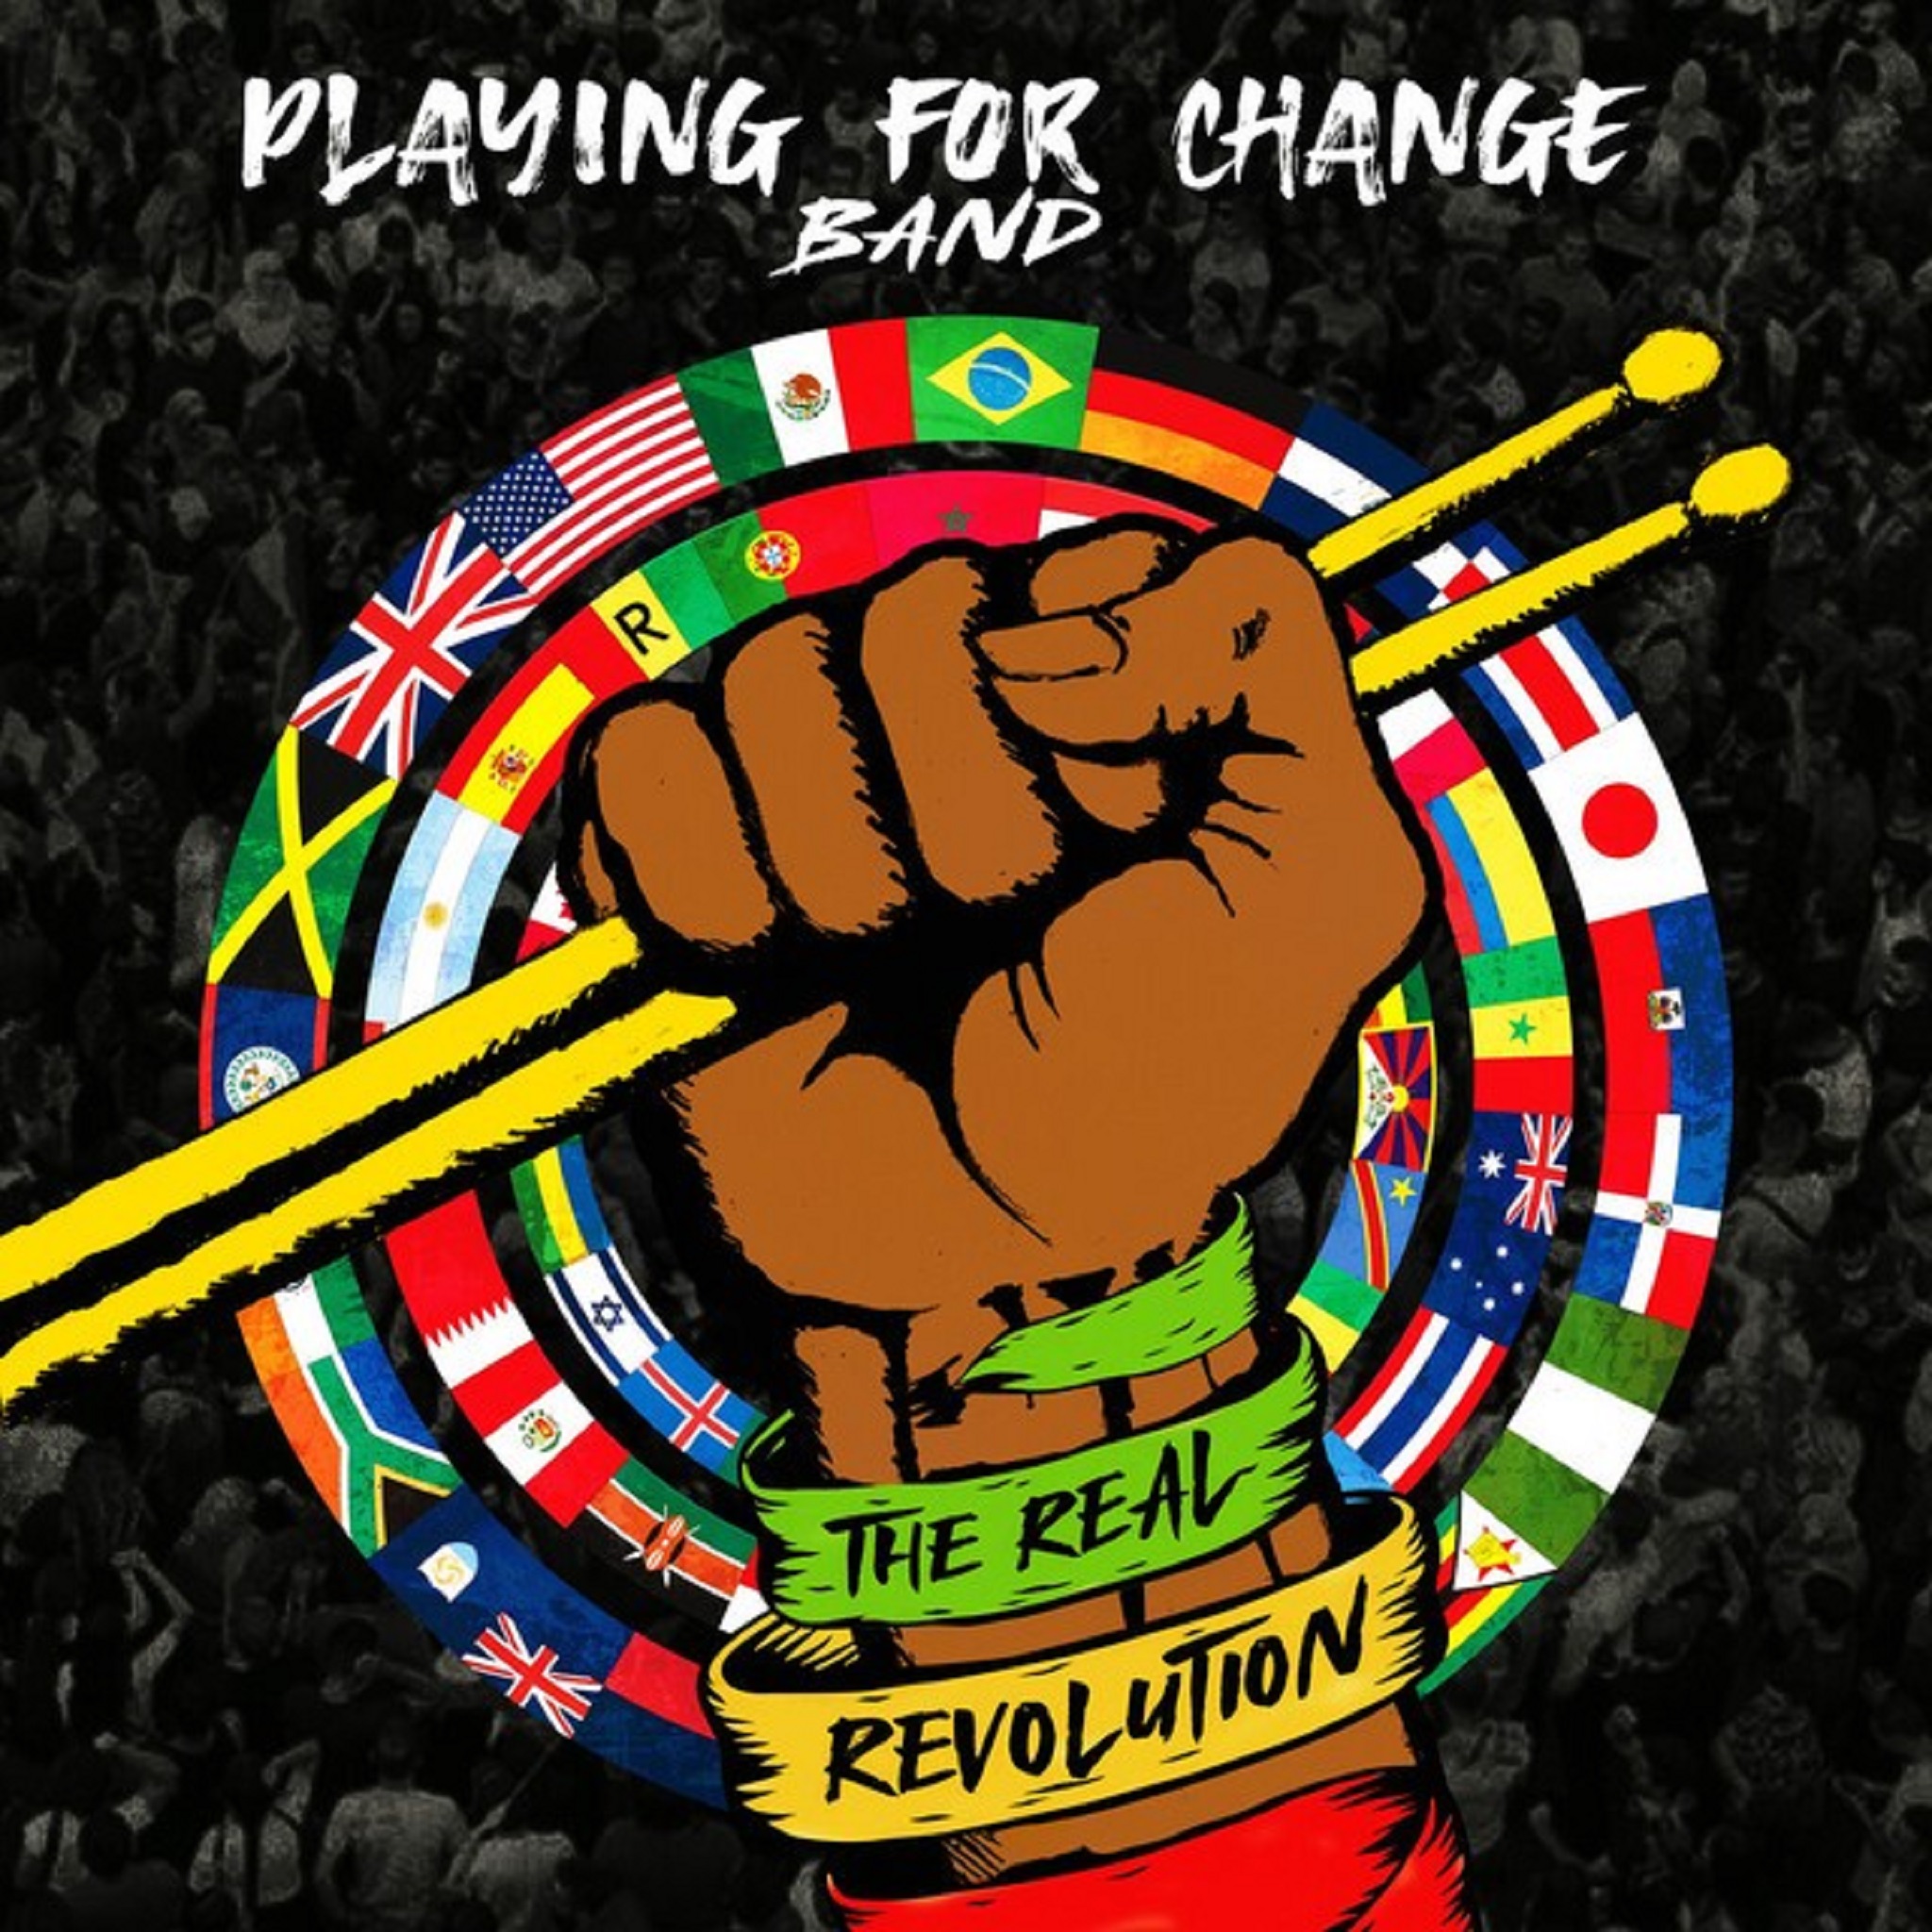 Playing For Change Announces The Real Revolution Due Out On June 24th!